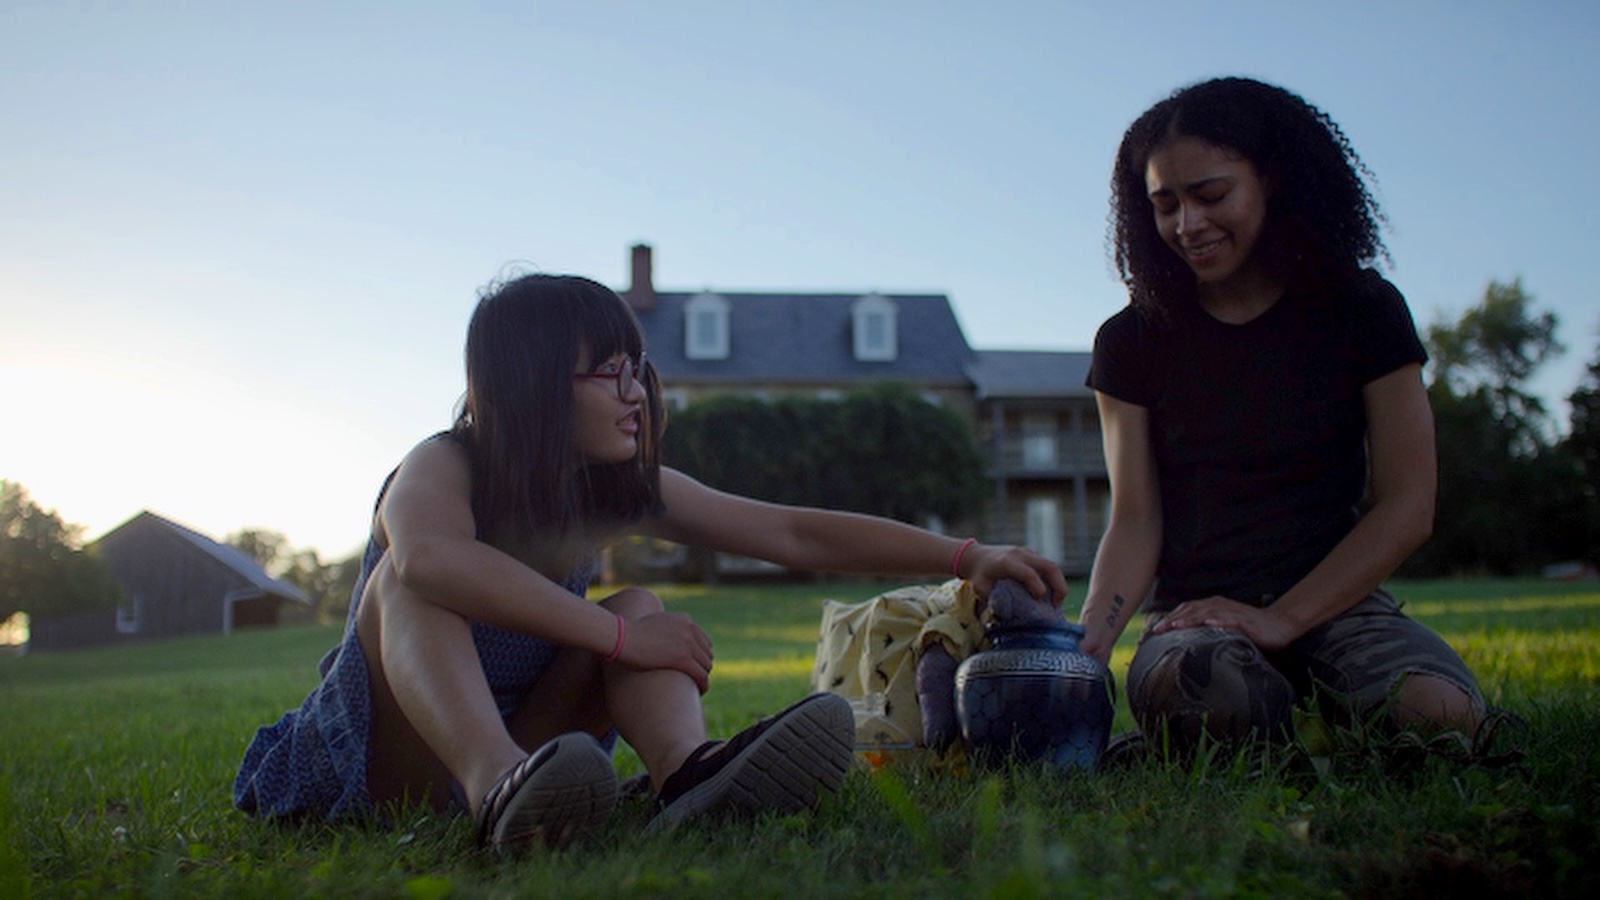 Two young people sit on a lawn